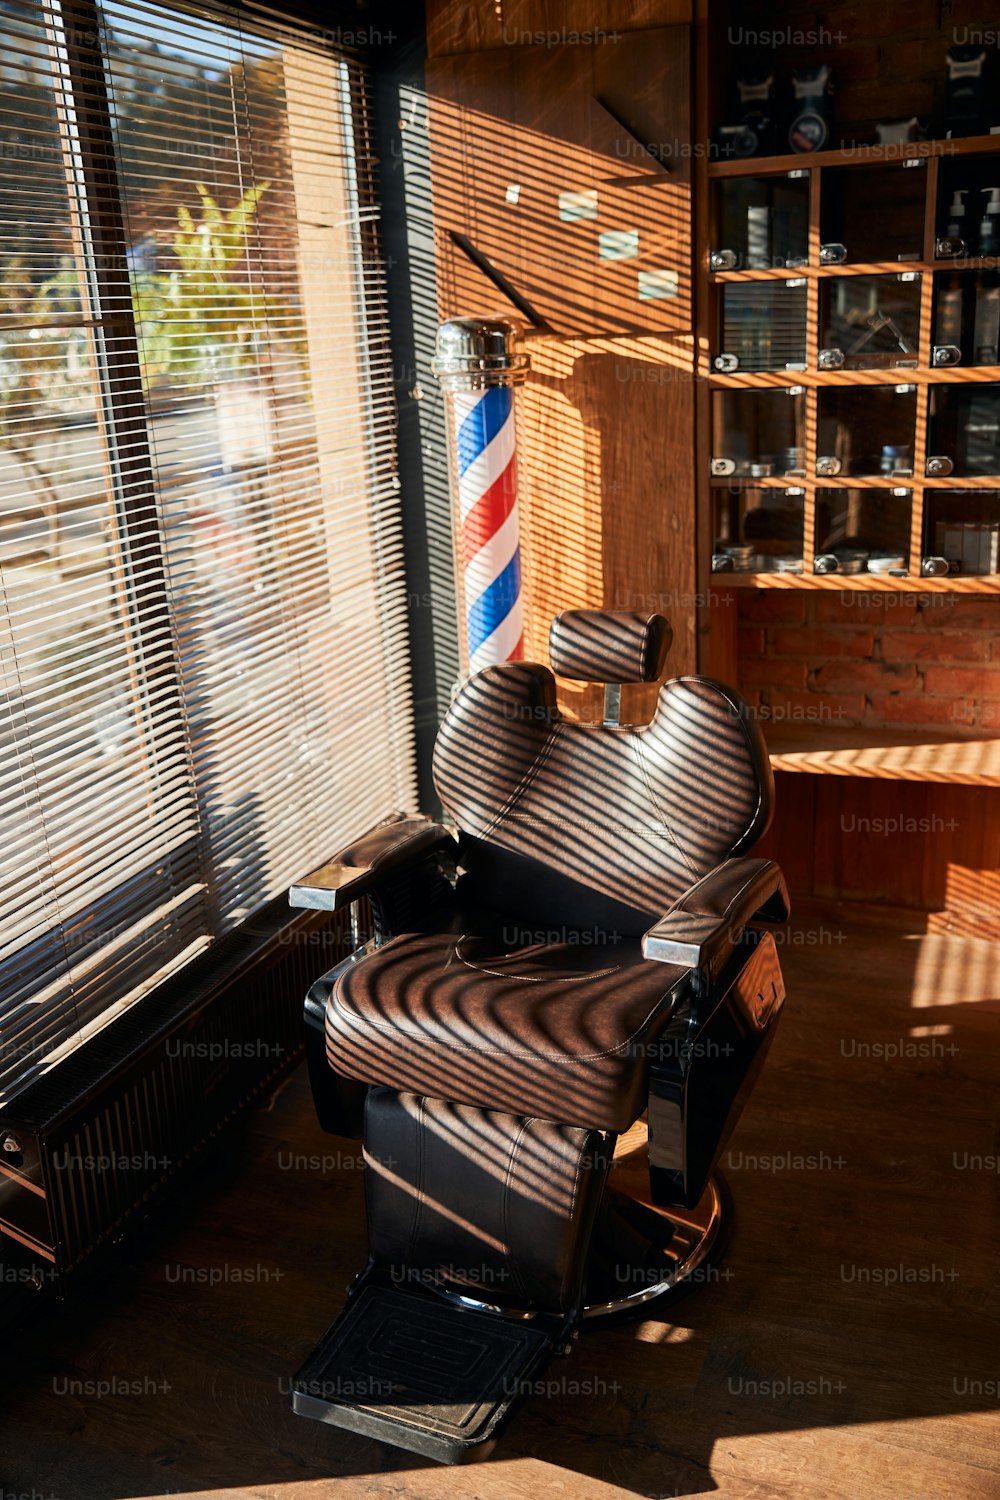 Reclining brown leather barber chair with adjustable headrest locating by the window with blinds